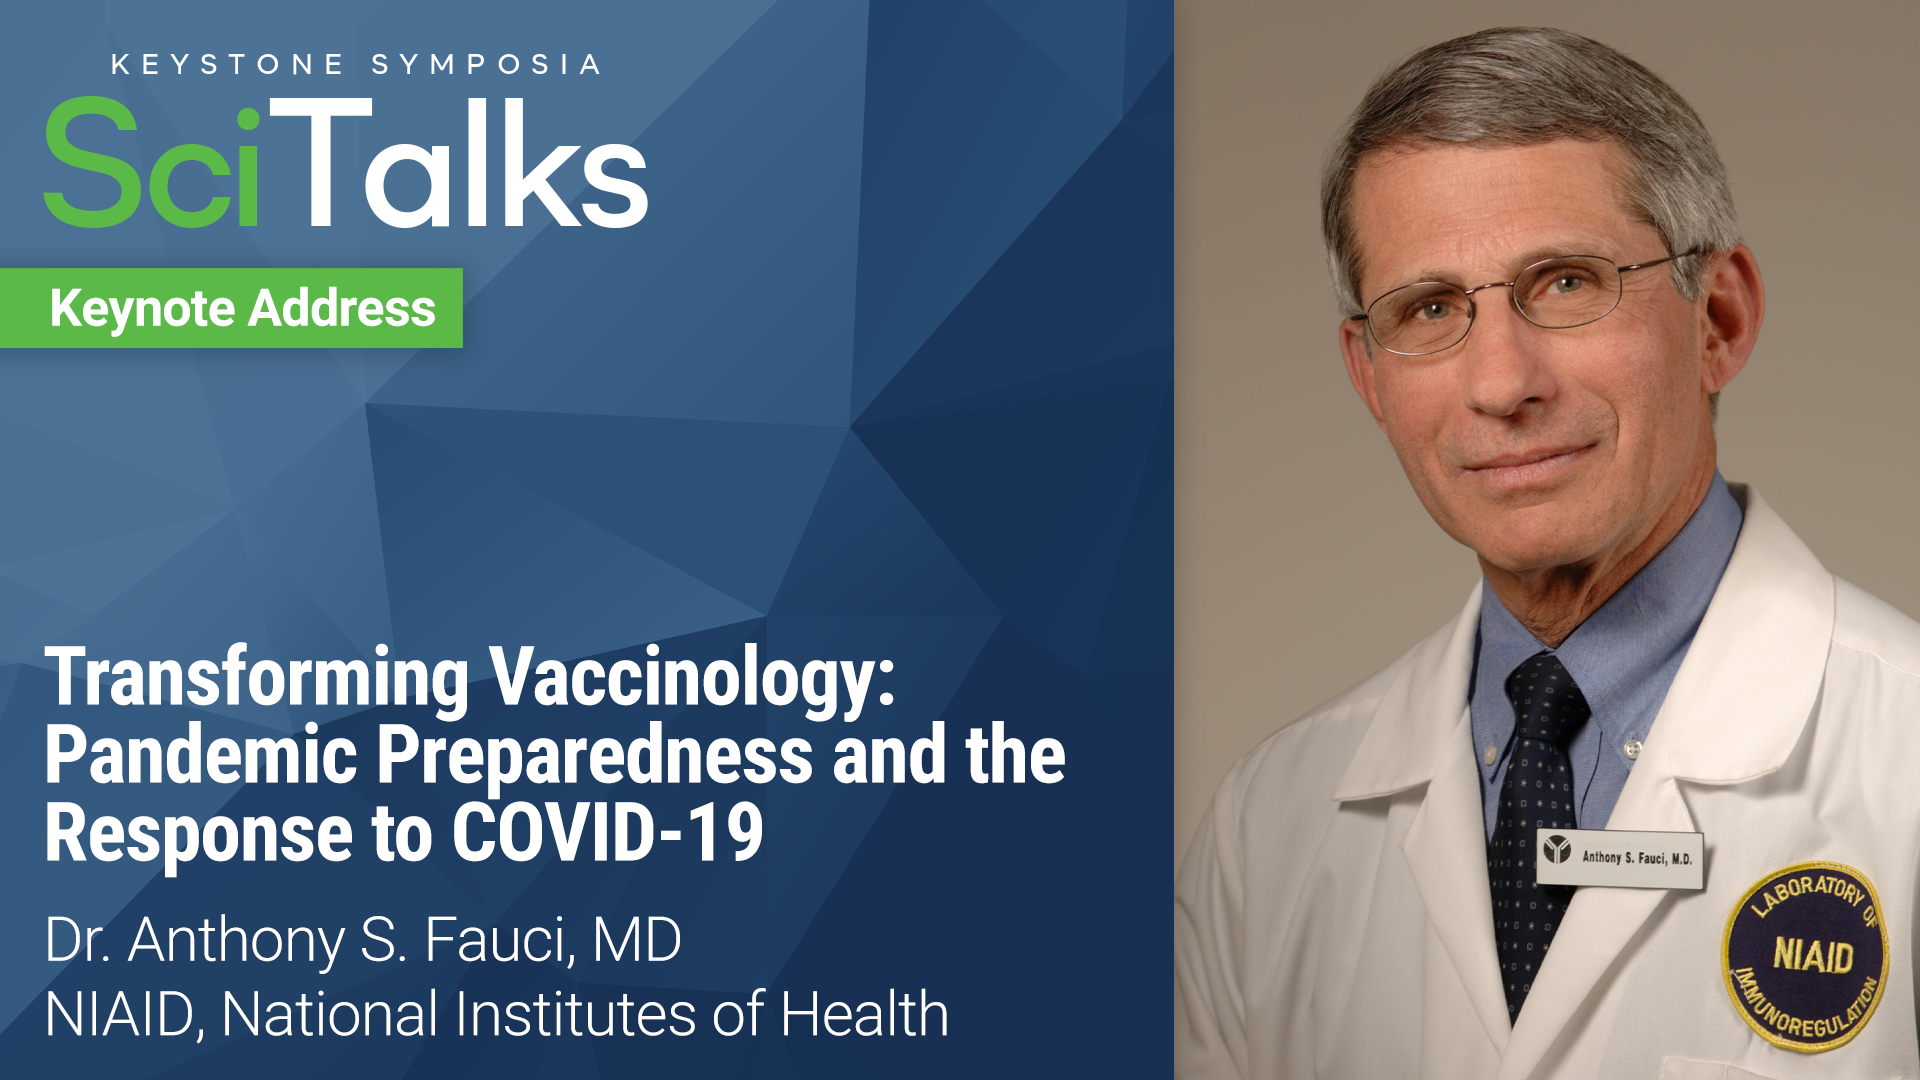 SciTalks: Transforming Vaccinology: Pandemic Preparedness and the Response to Covid-19 by Dr. Anthony Fauci of the National Institutes of Health